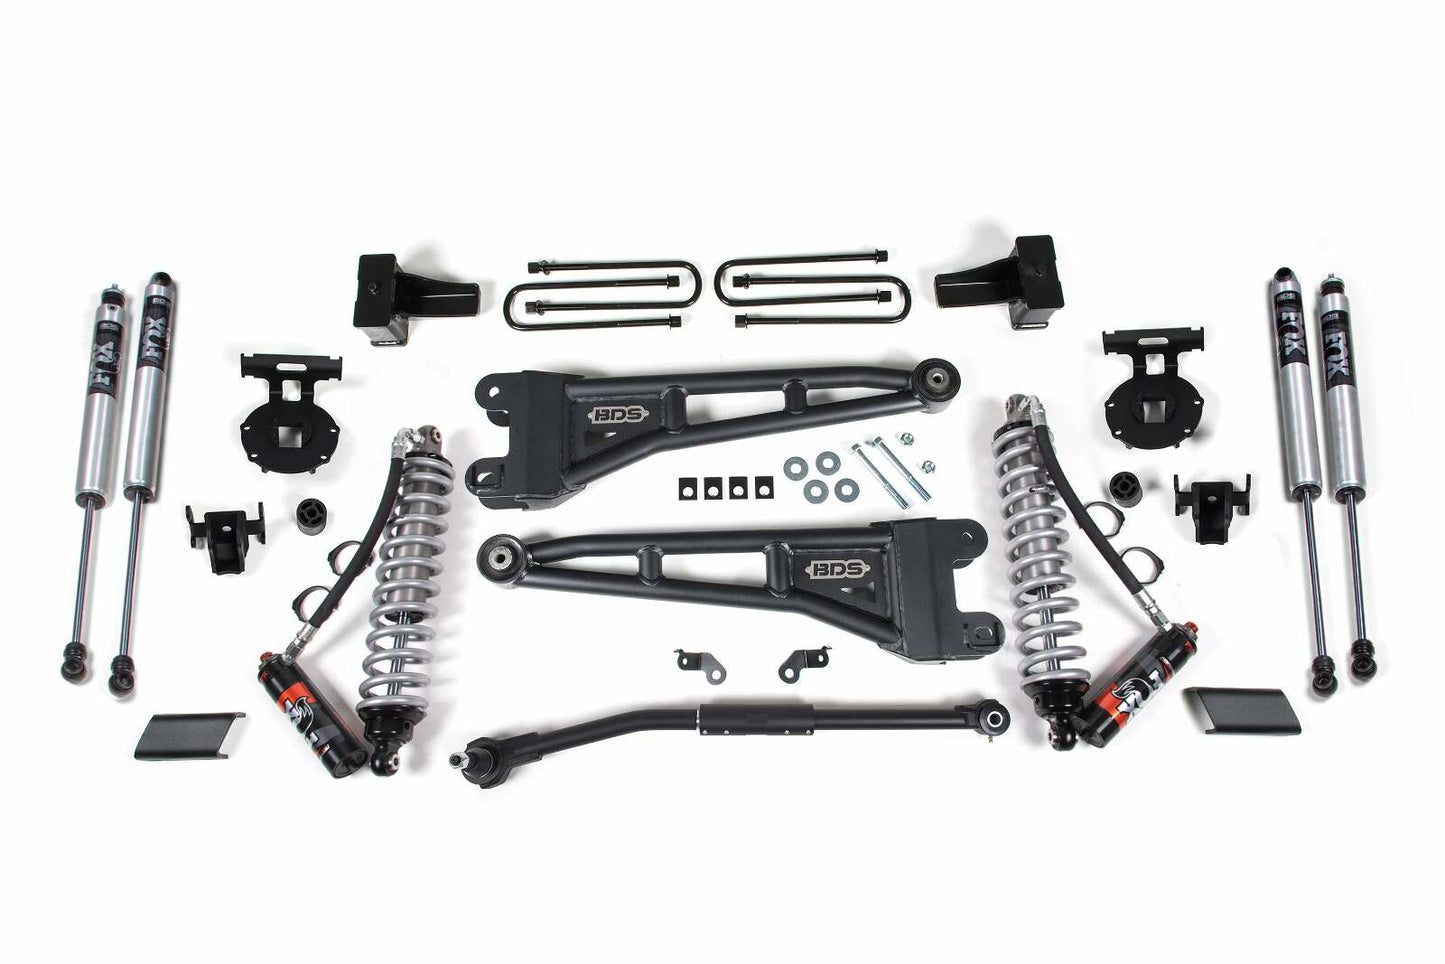 2017-2019 Ford F250/F350 4wd 2.5" Radius Arm Suspension Lift Kit, 1" Rear, Block, Diesel - Fox 2.5 PES C/O Front, Fox 2.0 IFP PS Aux Front, Fox 2.0 IFP PS Rear